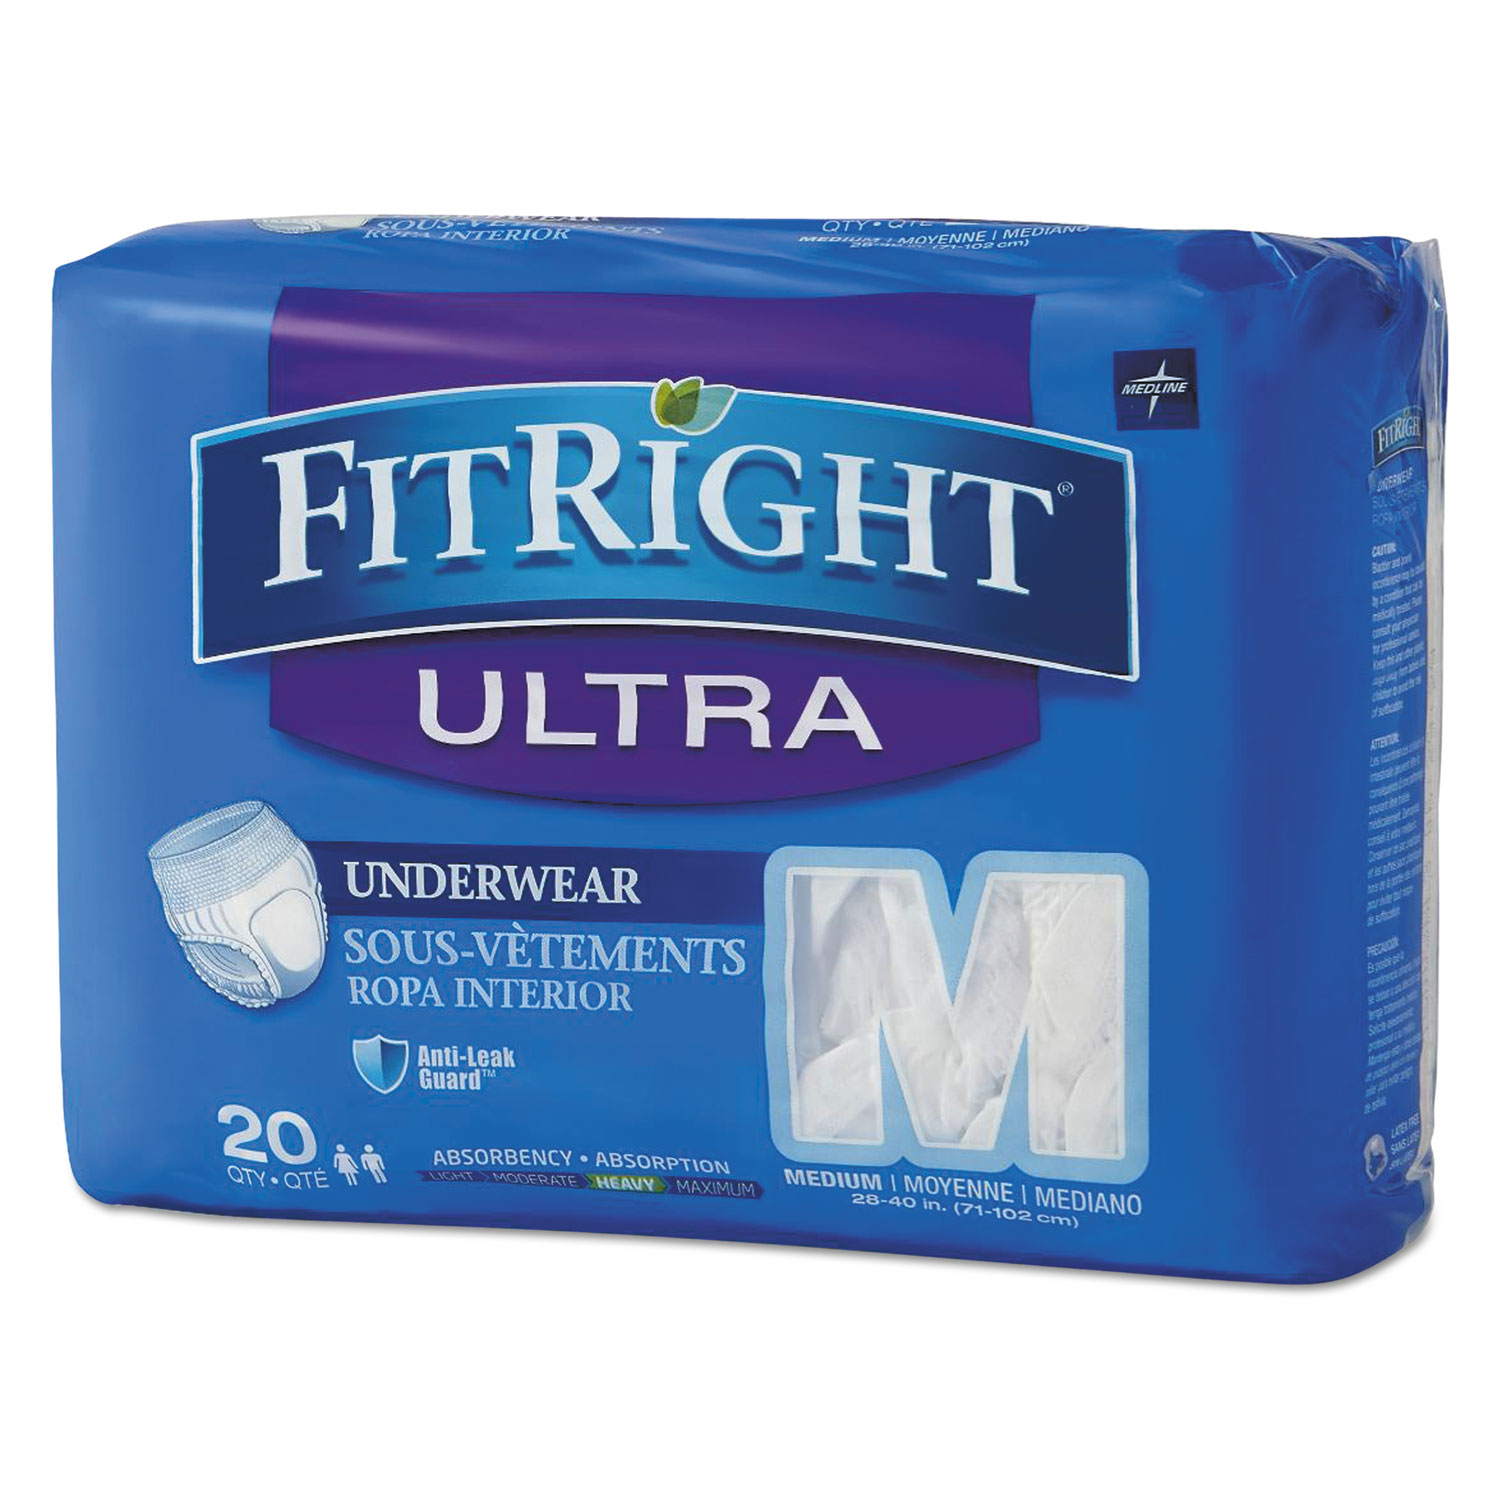  Medline FIT23005A FitRight Ultra Protective Underwear, Medium, 28 to 40 Waist, 20/Pack, 4 Pack/Carton (MIIFIT23005ACT) 